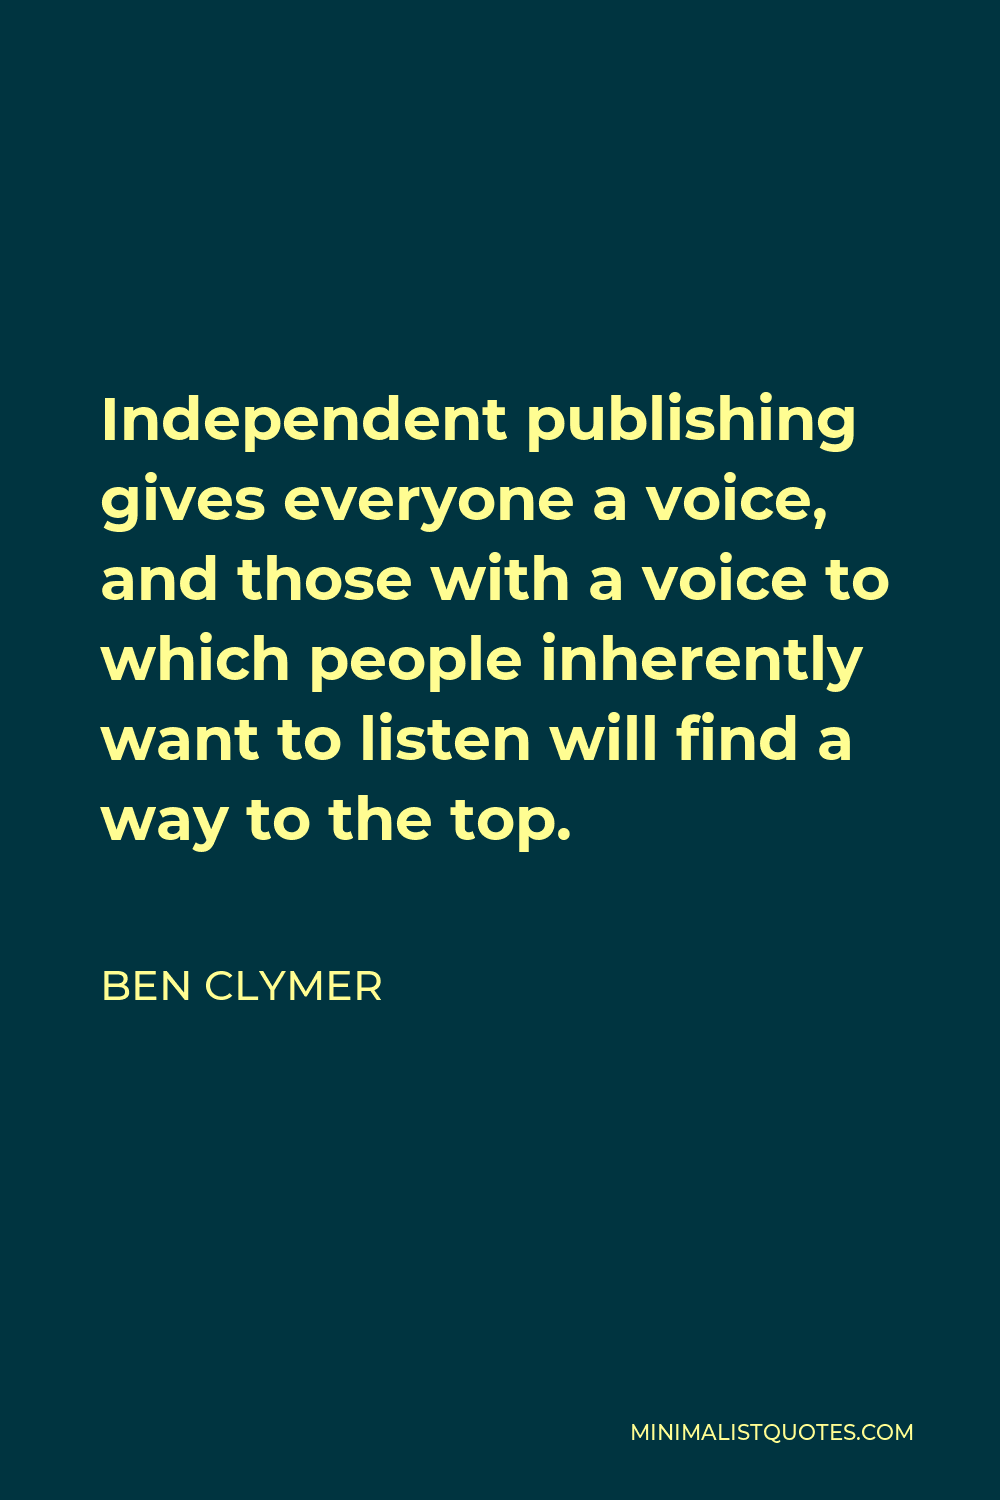 Ben Clymer Quote - Independent publishing gives everyone a voice, and those with a voice to which people inherently want to listen will find a way to the top.